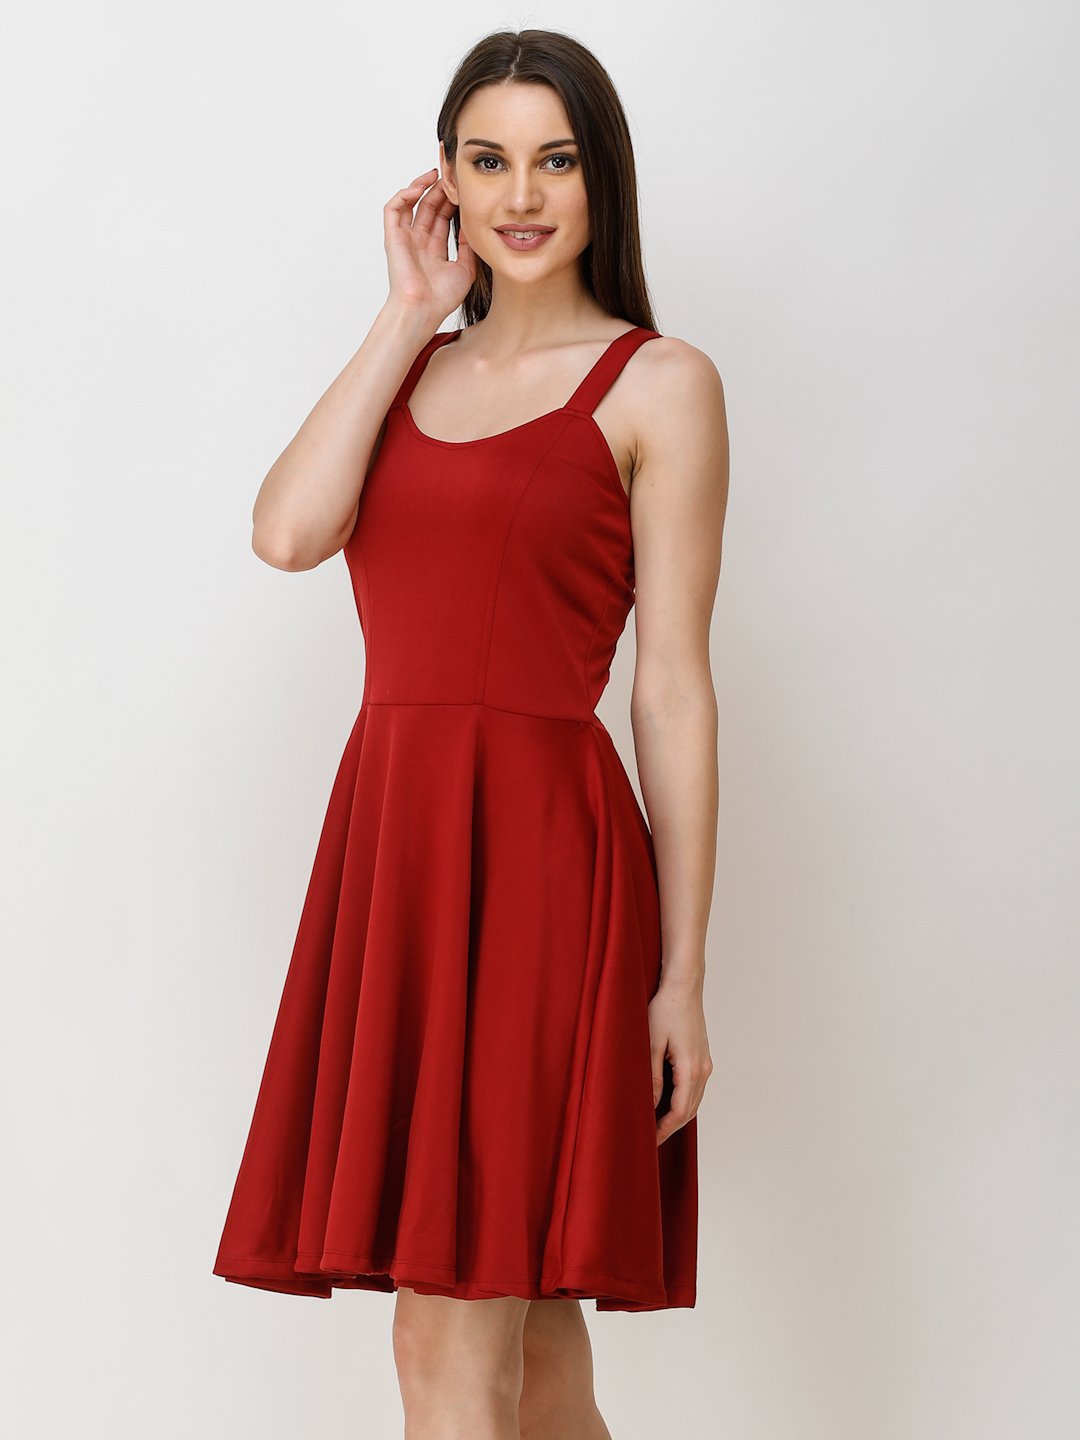 SCORPIUS Maroon STYLED BACK COCKTAIL DRESS